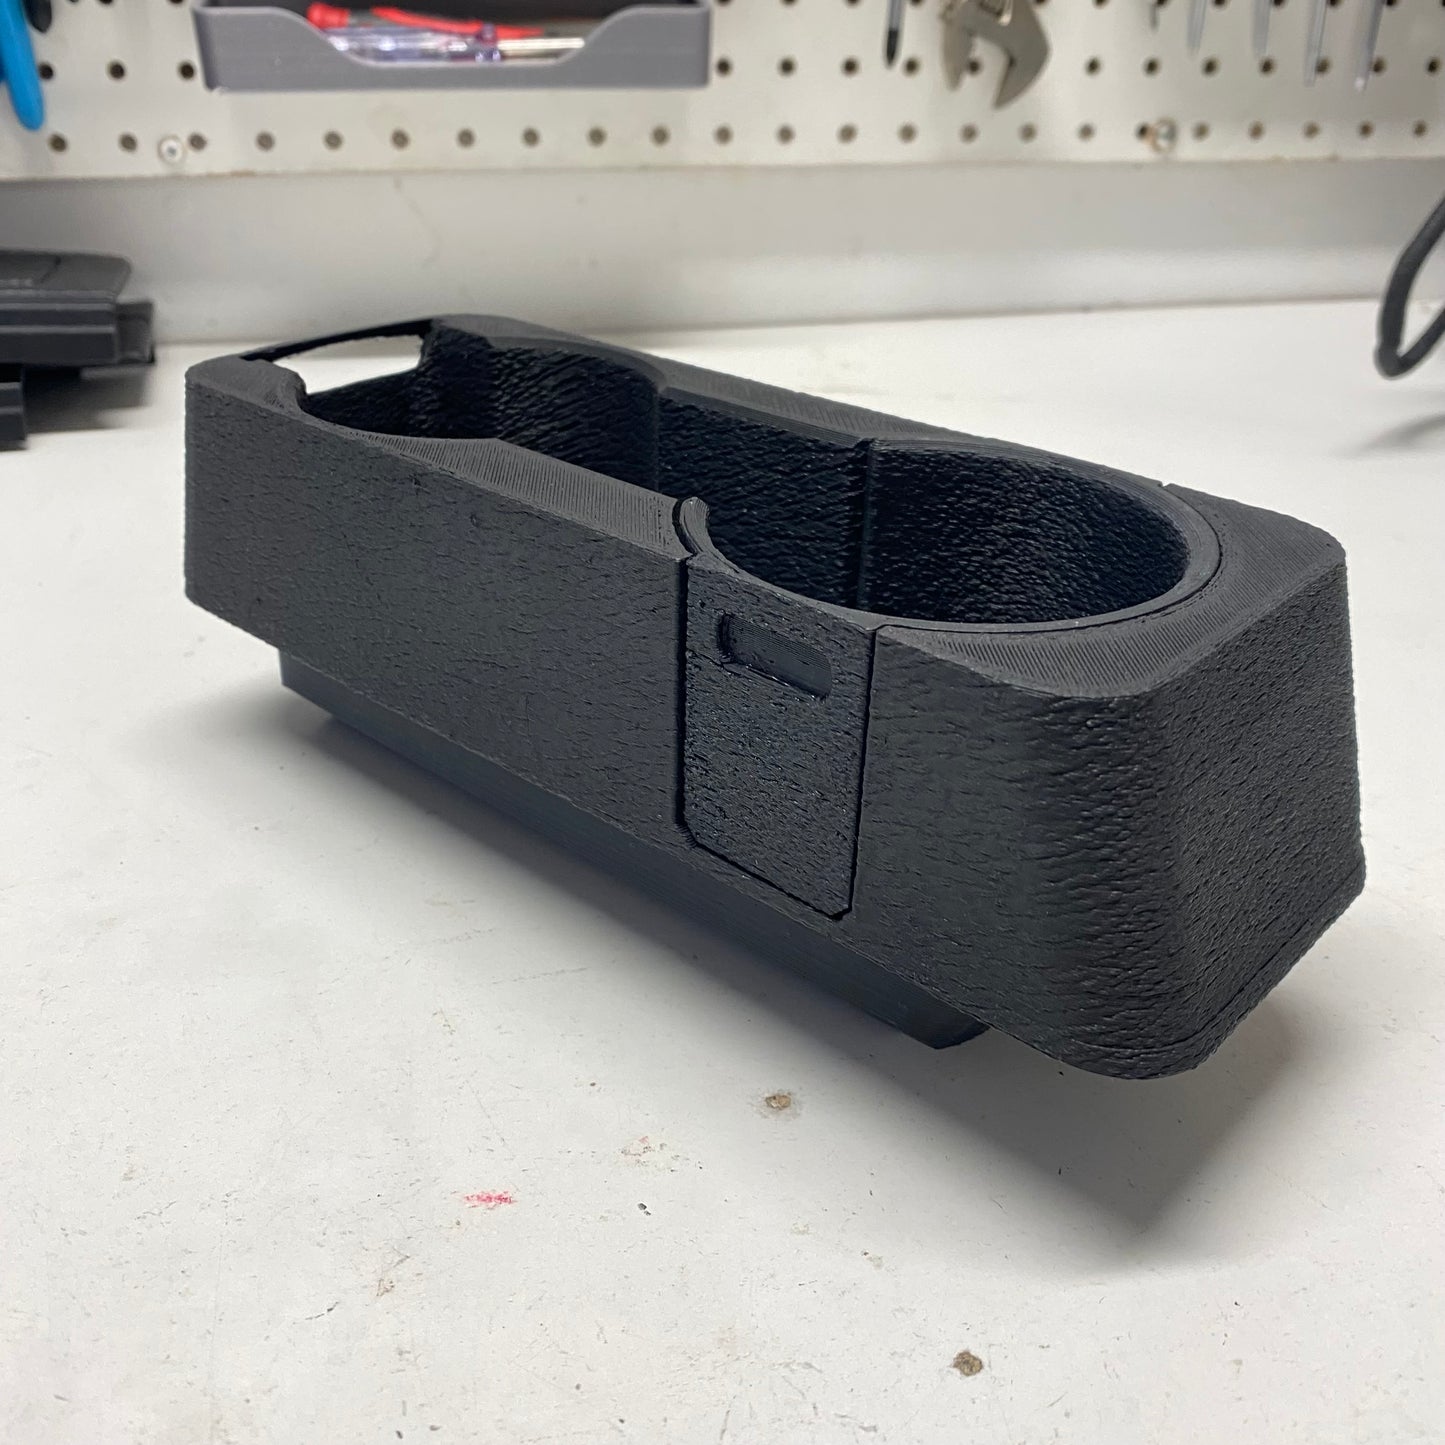 Graveyard #27 - BMW E30 Center Console Cupholder with Hidden Storage - No Lining